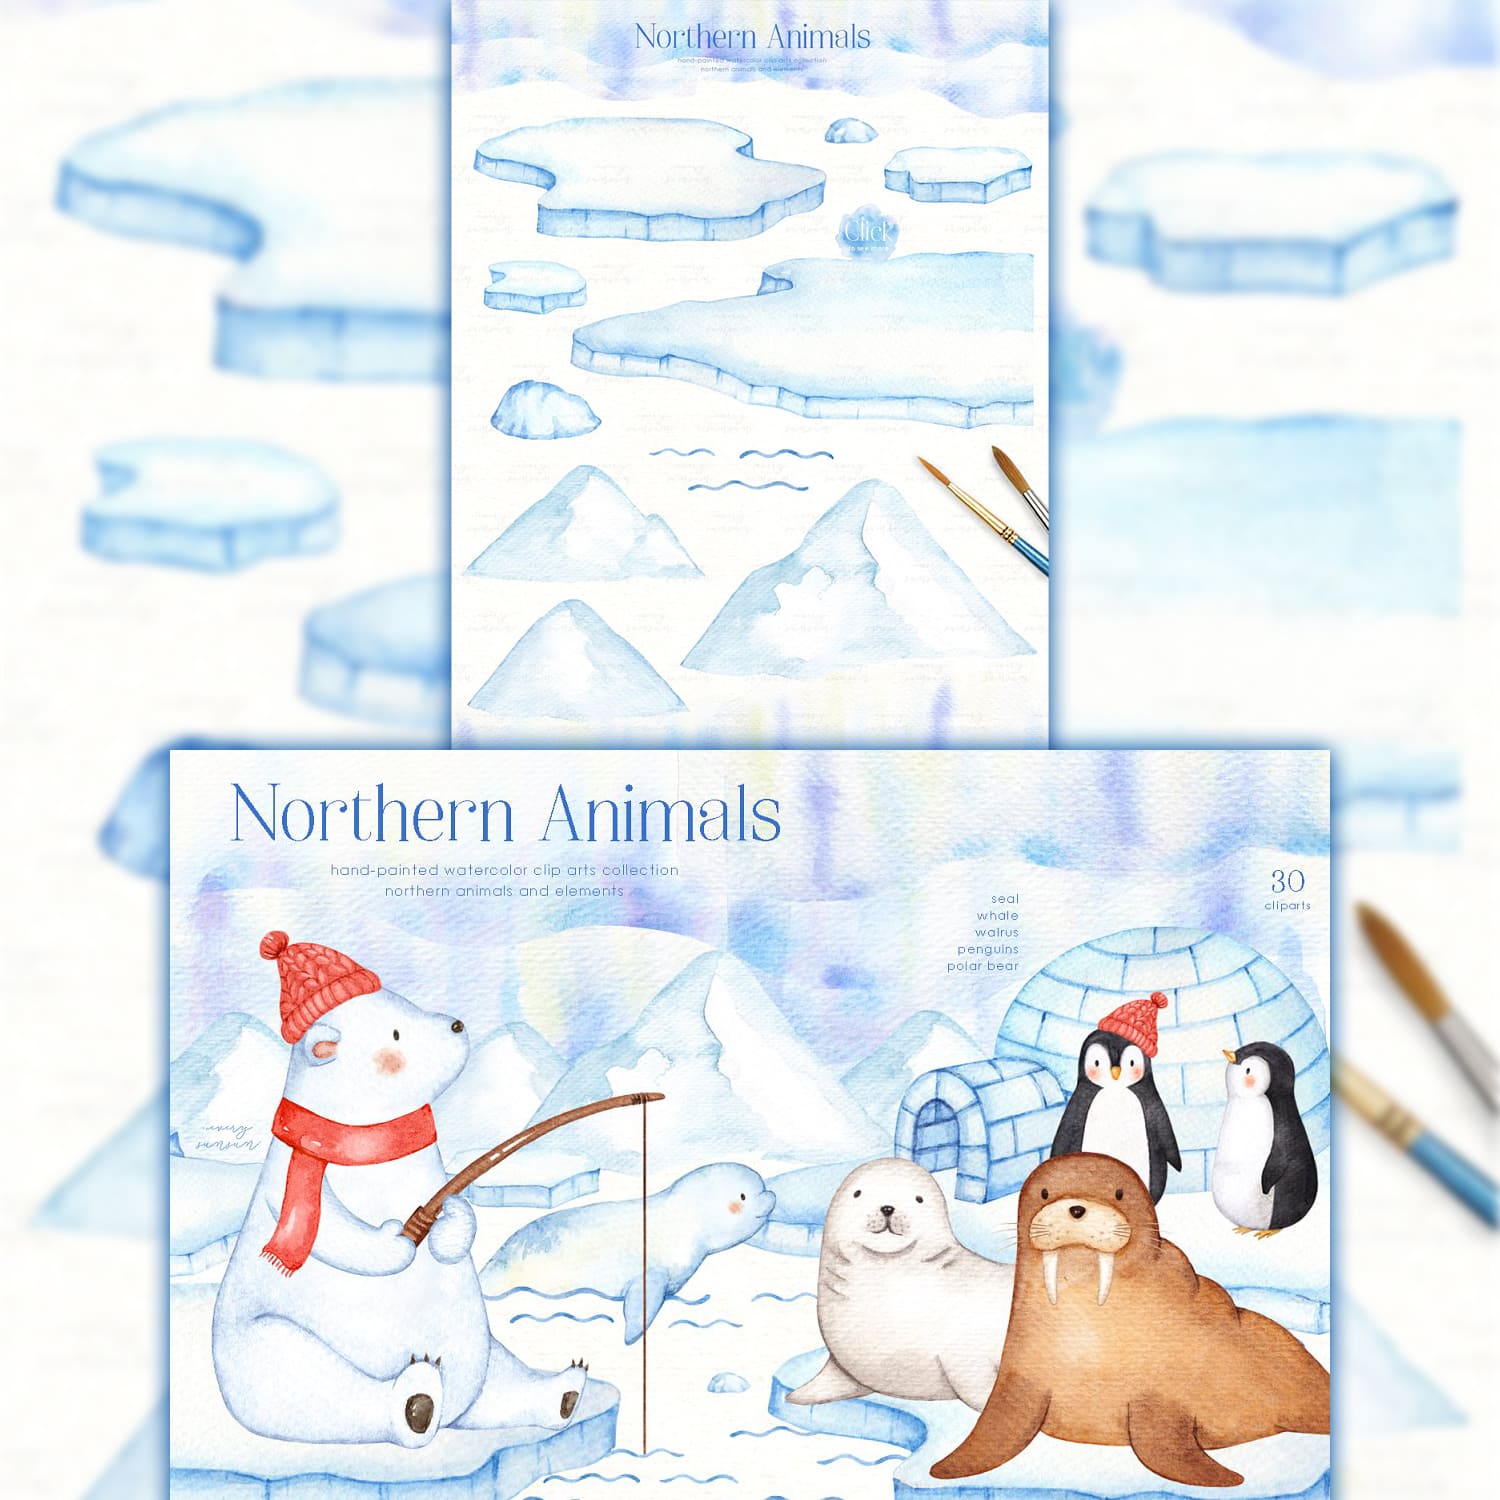 Northern Animals Watercolor Clip Art cover.